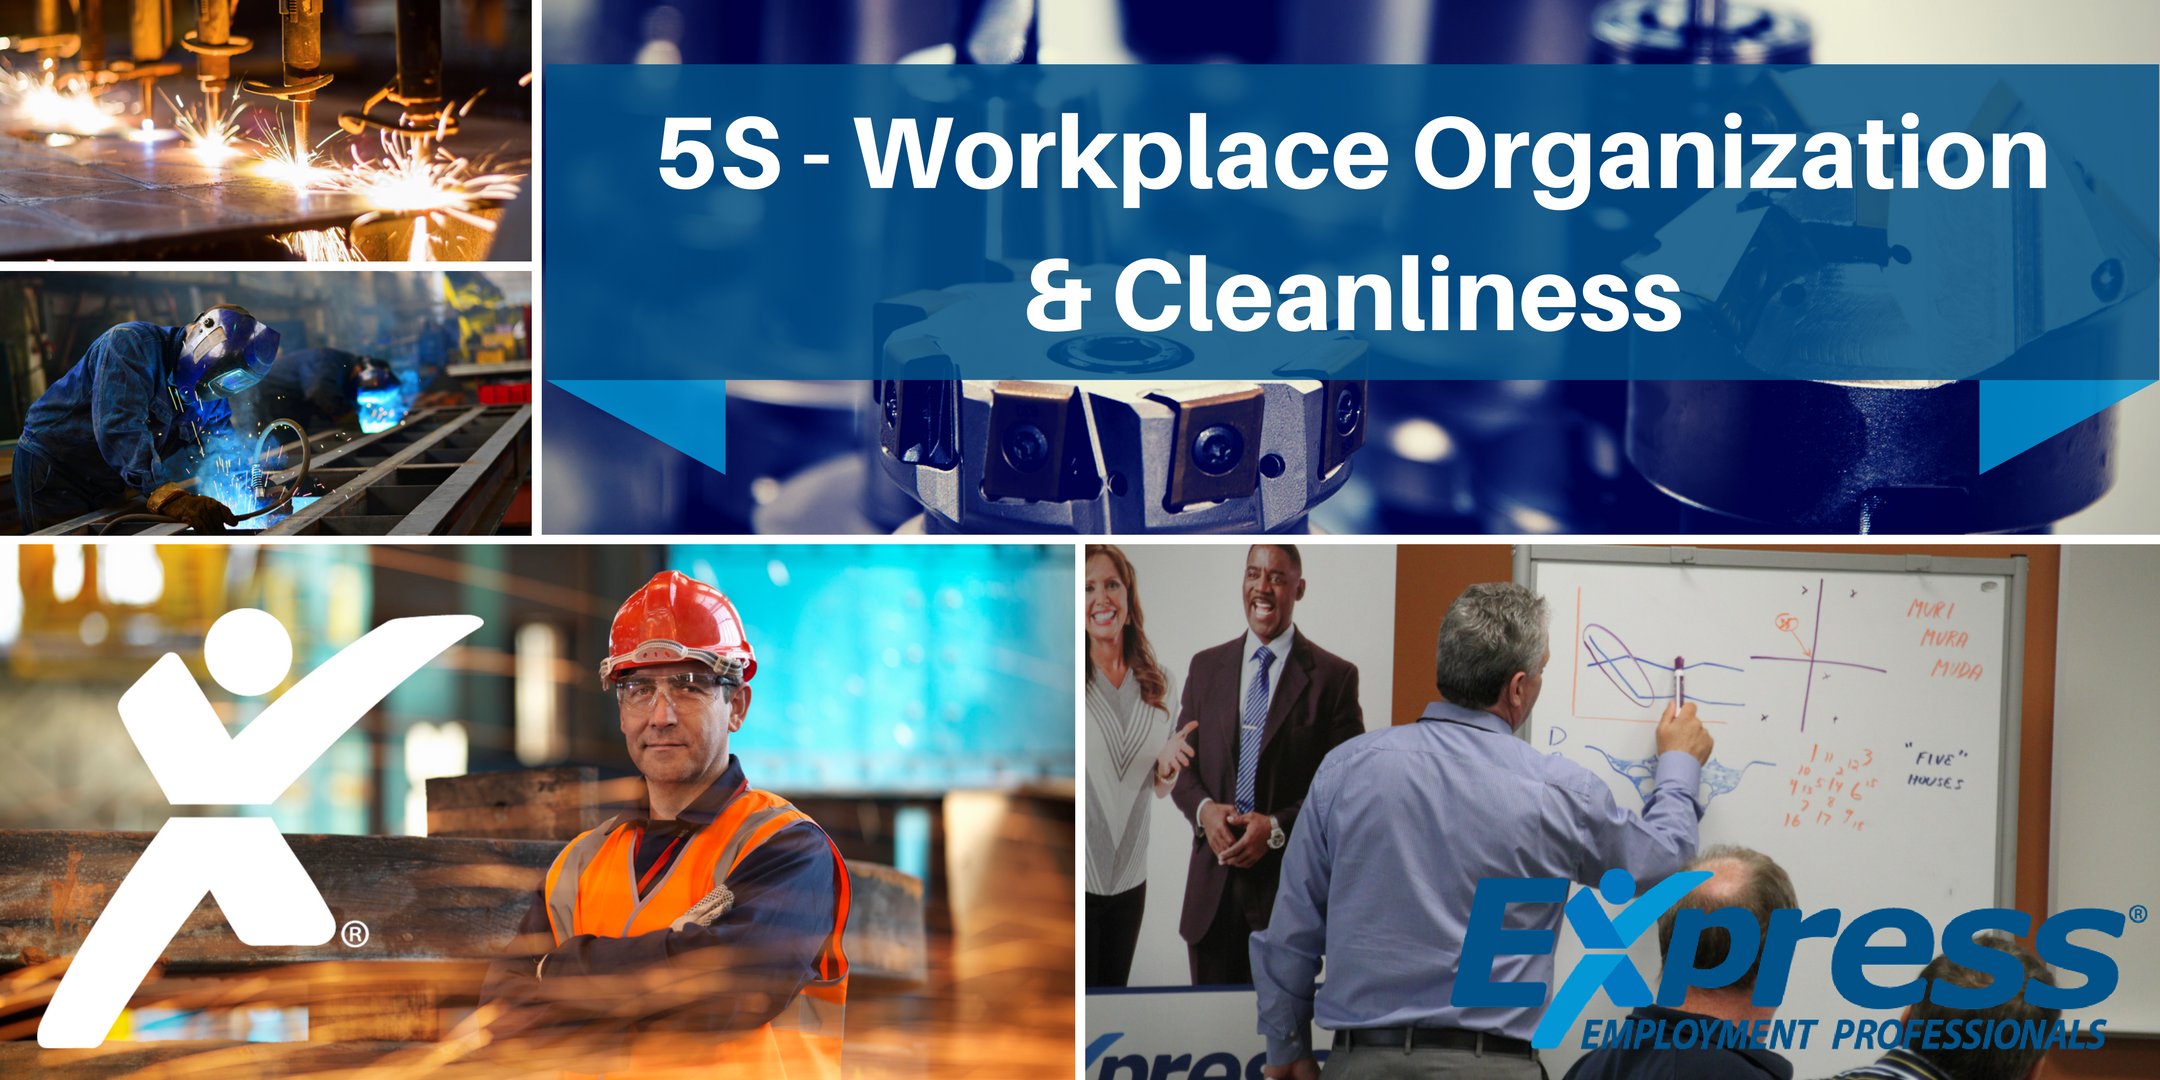 5S - Workplace Organization & Cleanliness